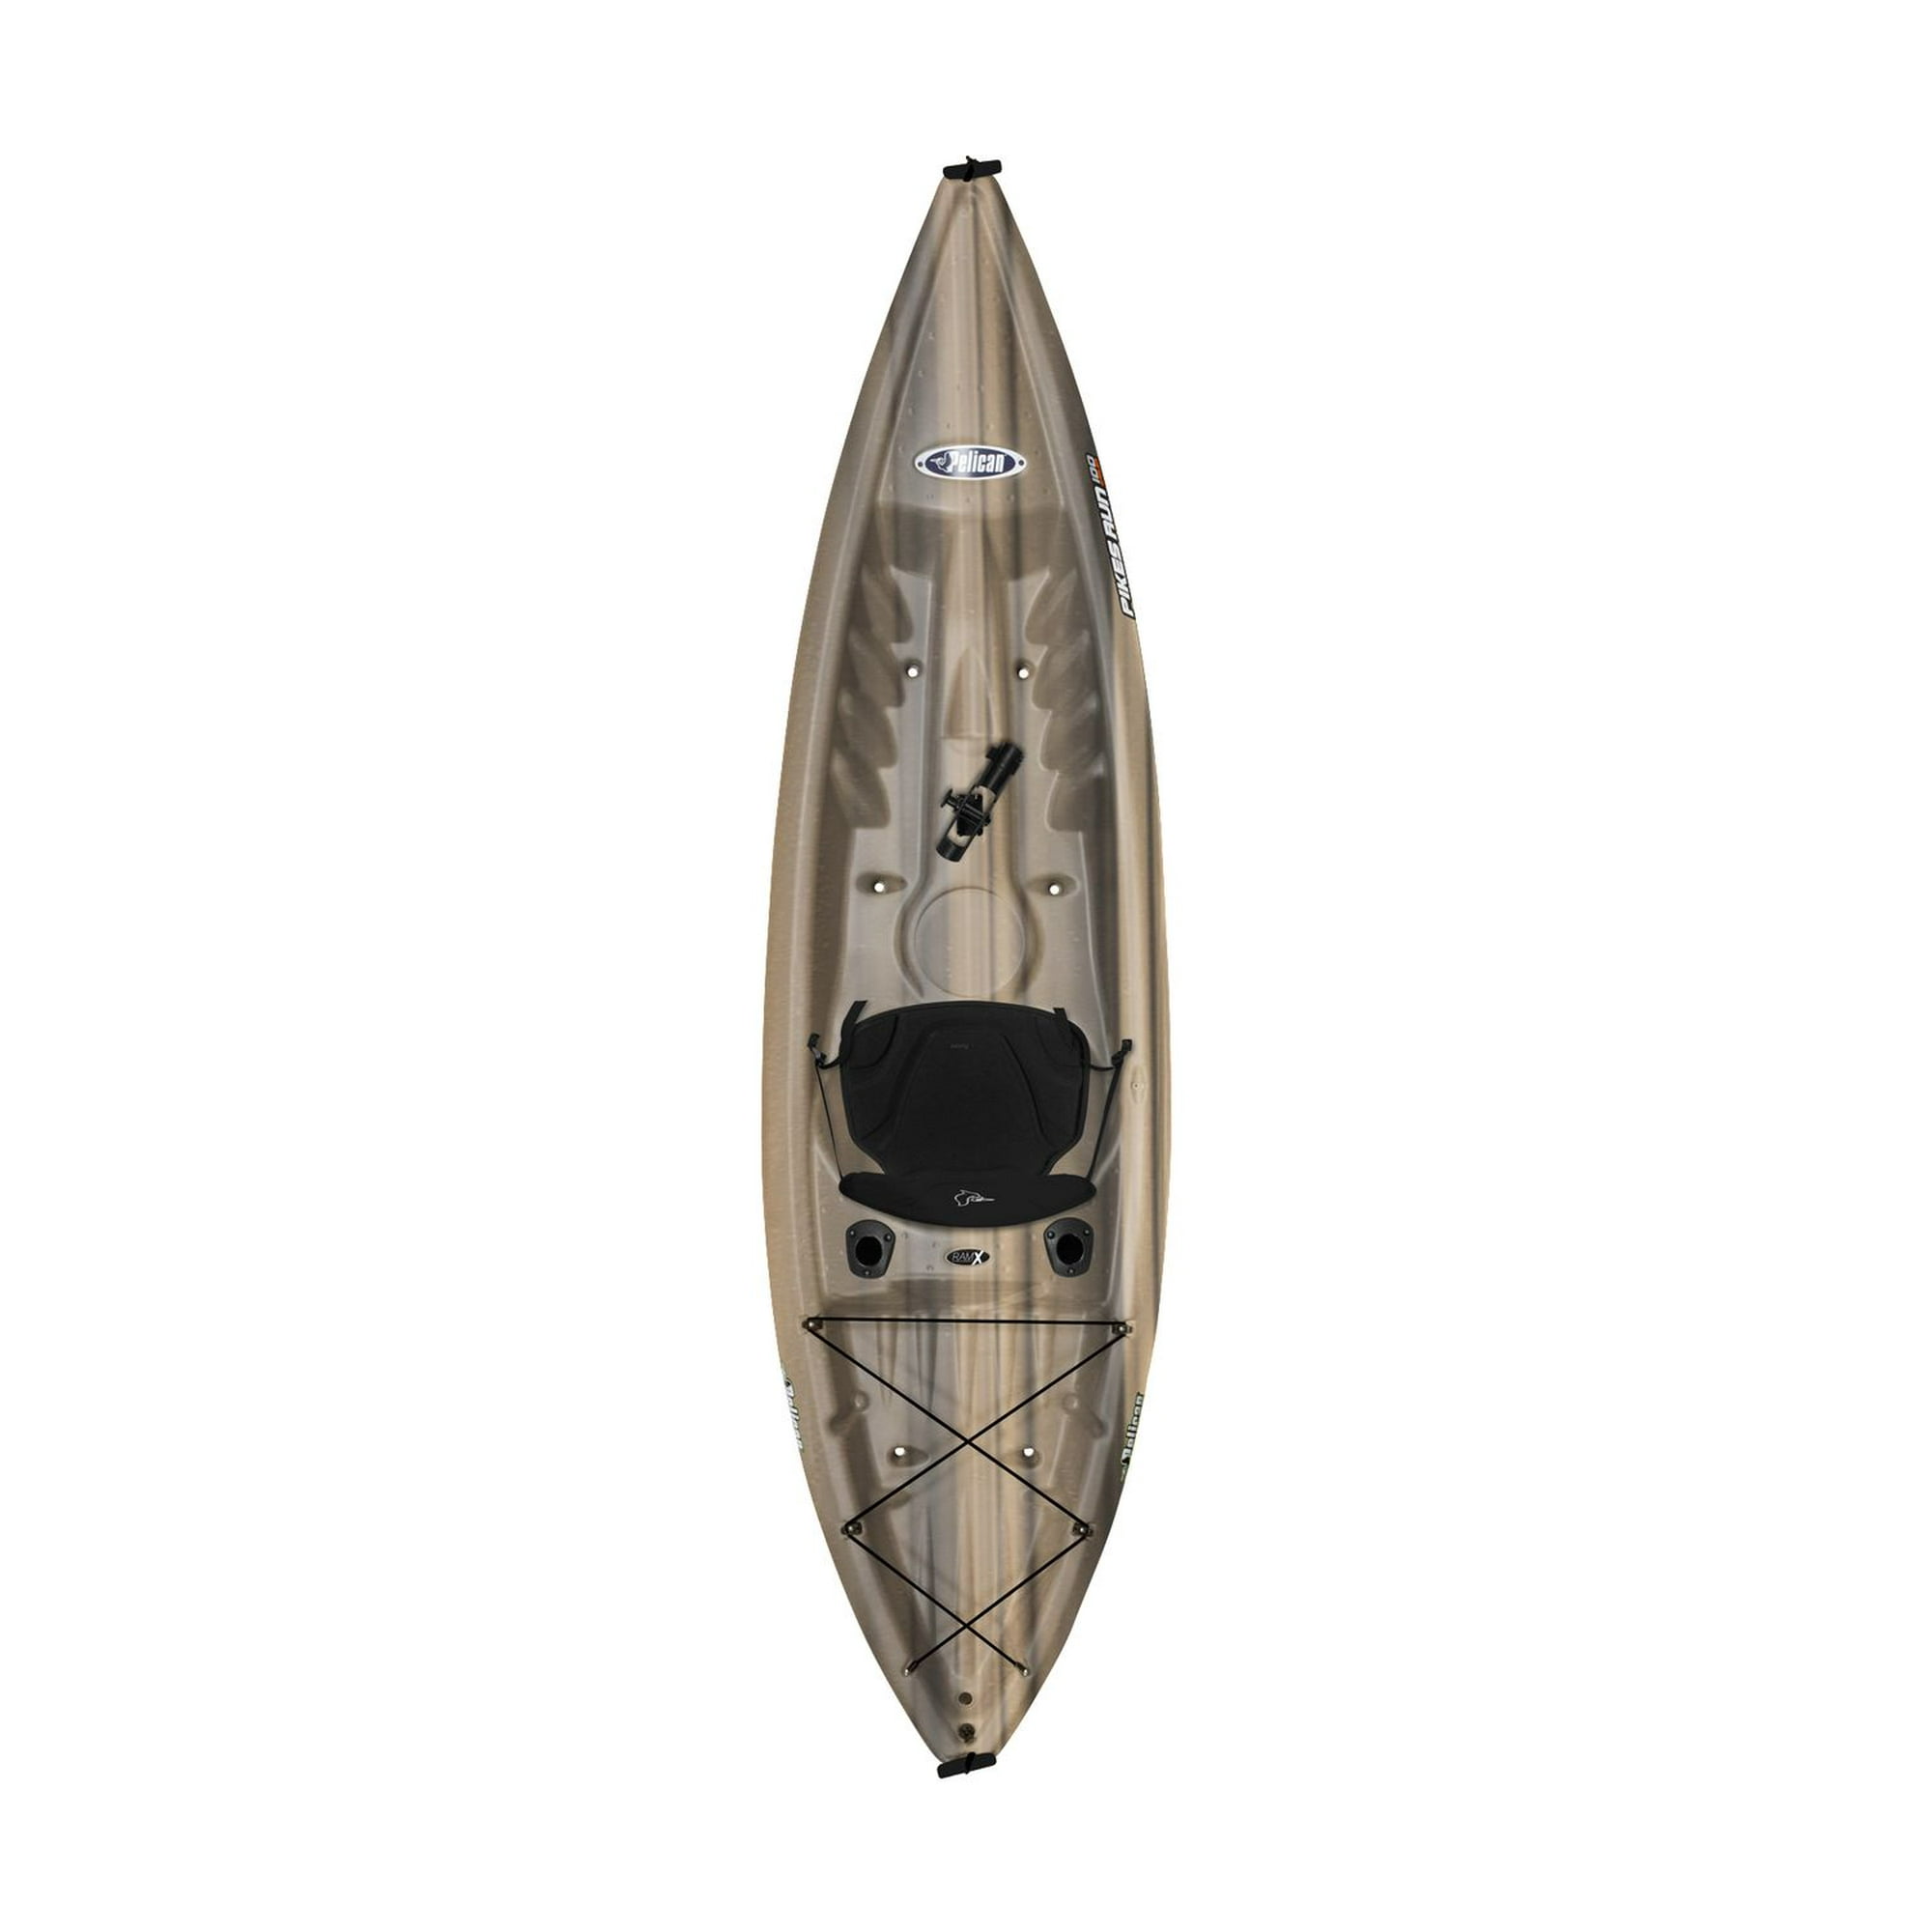 Fishing Sit-on-Top Kayak - Pelican PIKES RUN 100 ANGLER - Fade Black Sand -  10 feet - Stable, Safe, with Fishing Features one-Person Kayak - KOF10P201  